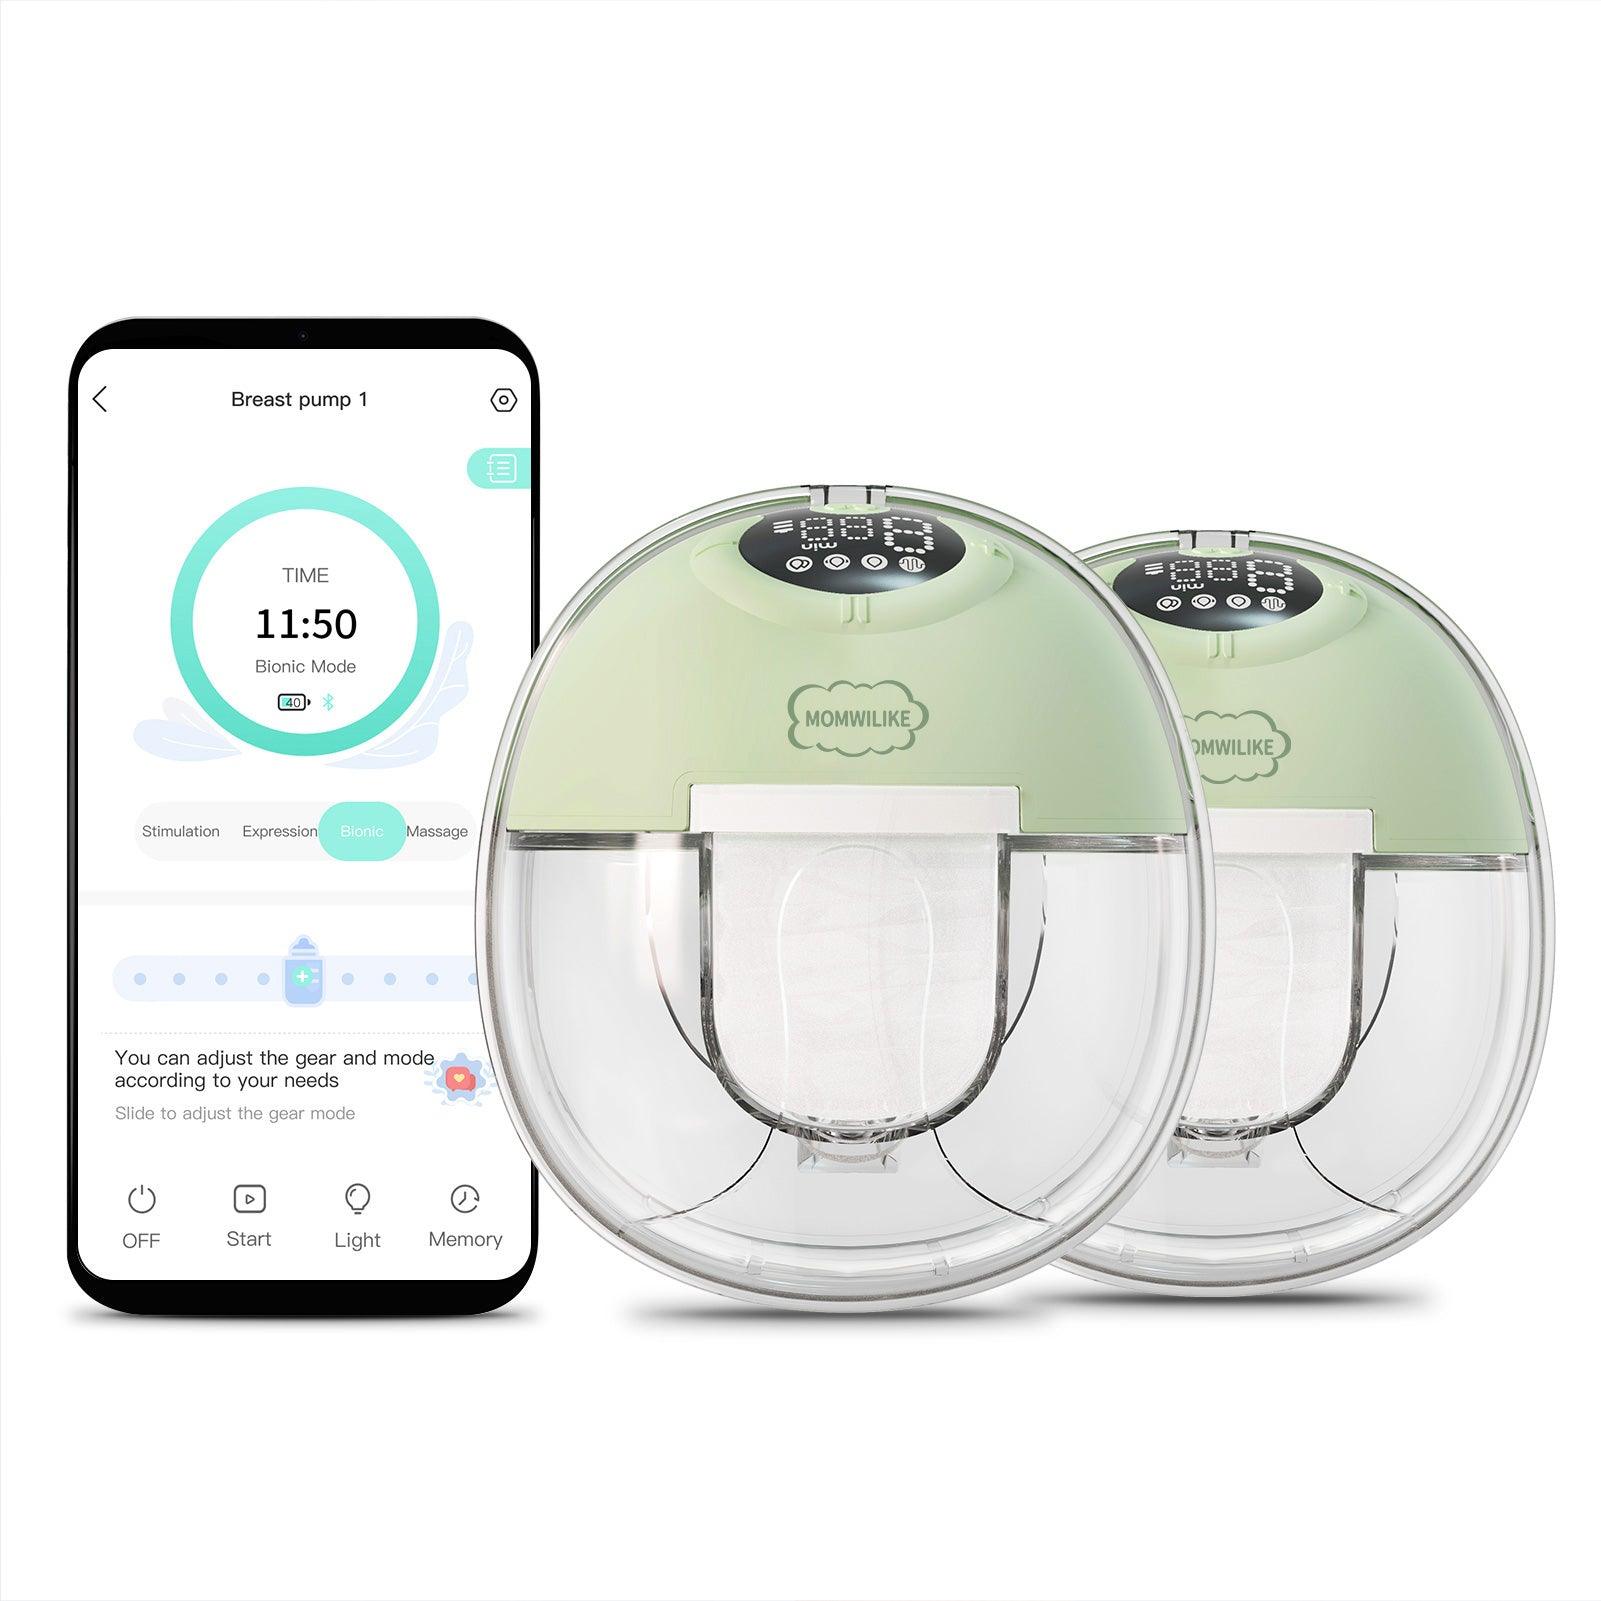 Medela Launches Innovative Smart Watch App for New Parents